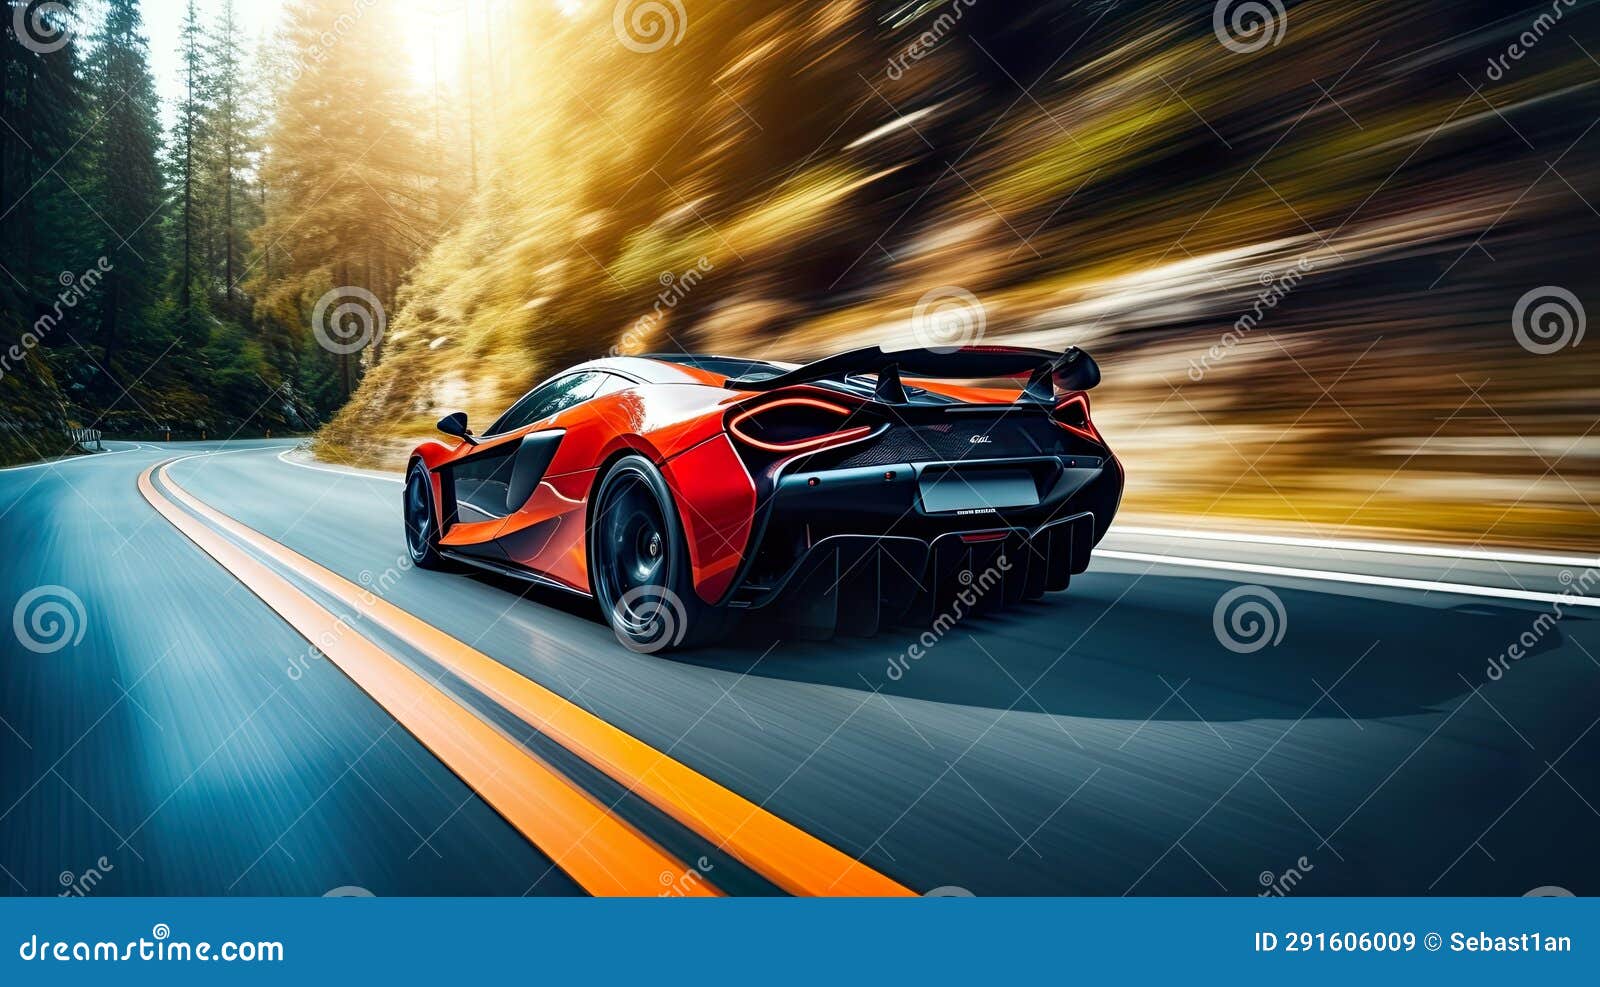 dynamic image captures a sport car in action on a road, showcasing the exhilaration of high-speed motion